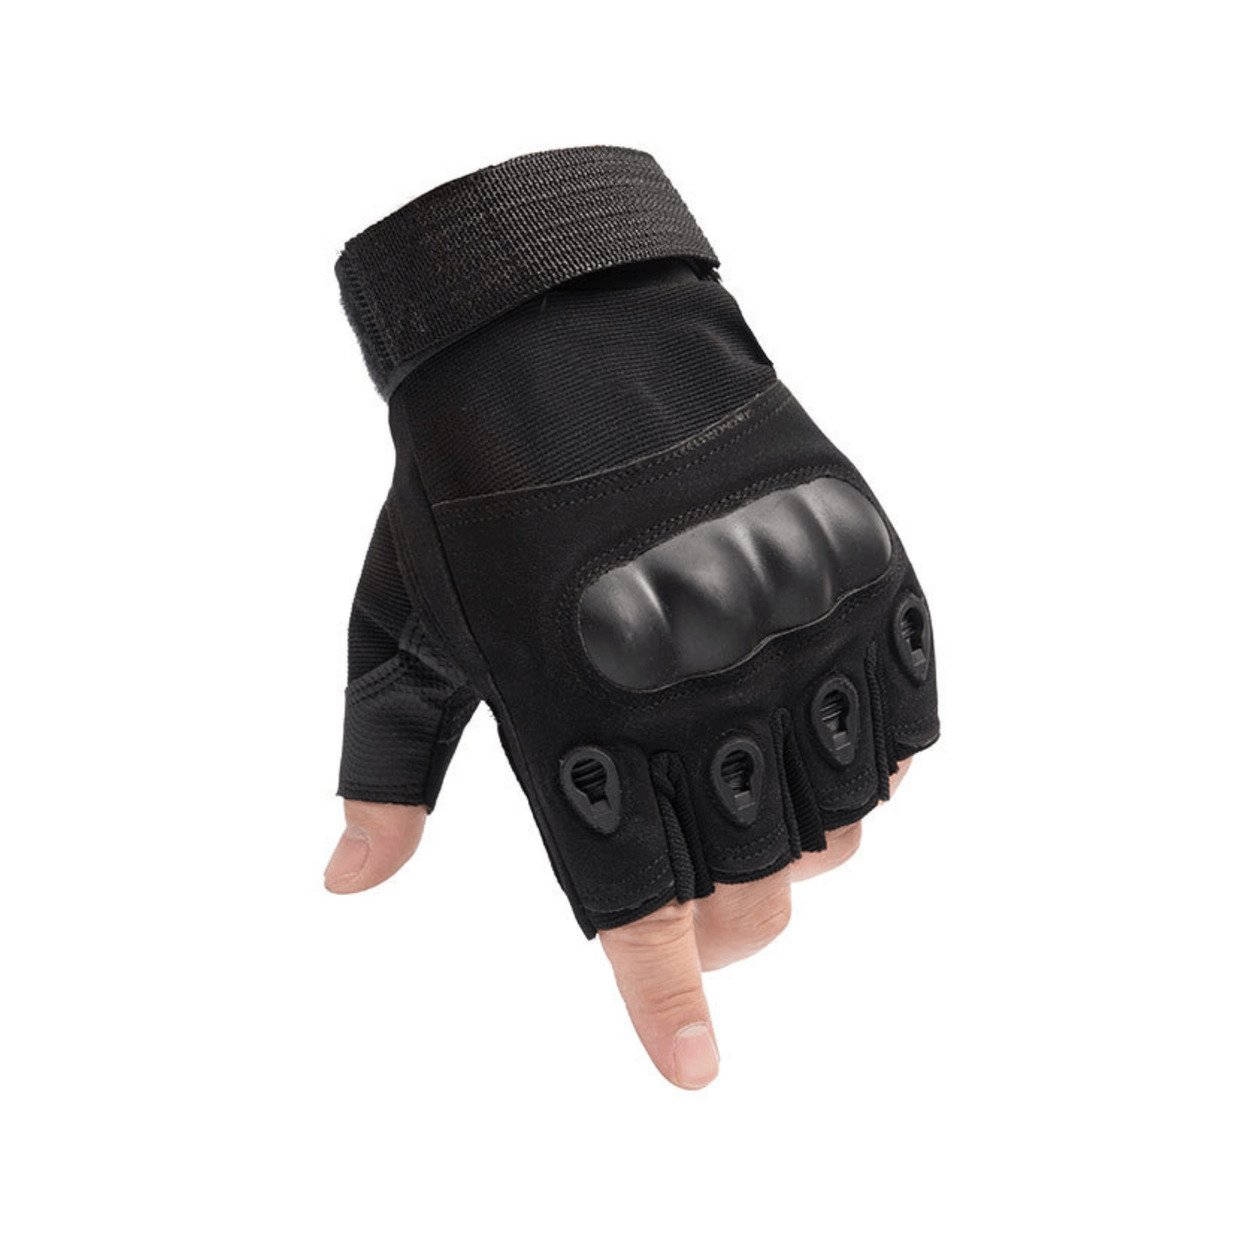 Tactical Fingerless Airsoft Gloves For Outdoor Sports, Paintball, And Motorcycling - Black, Medium